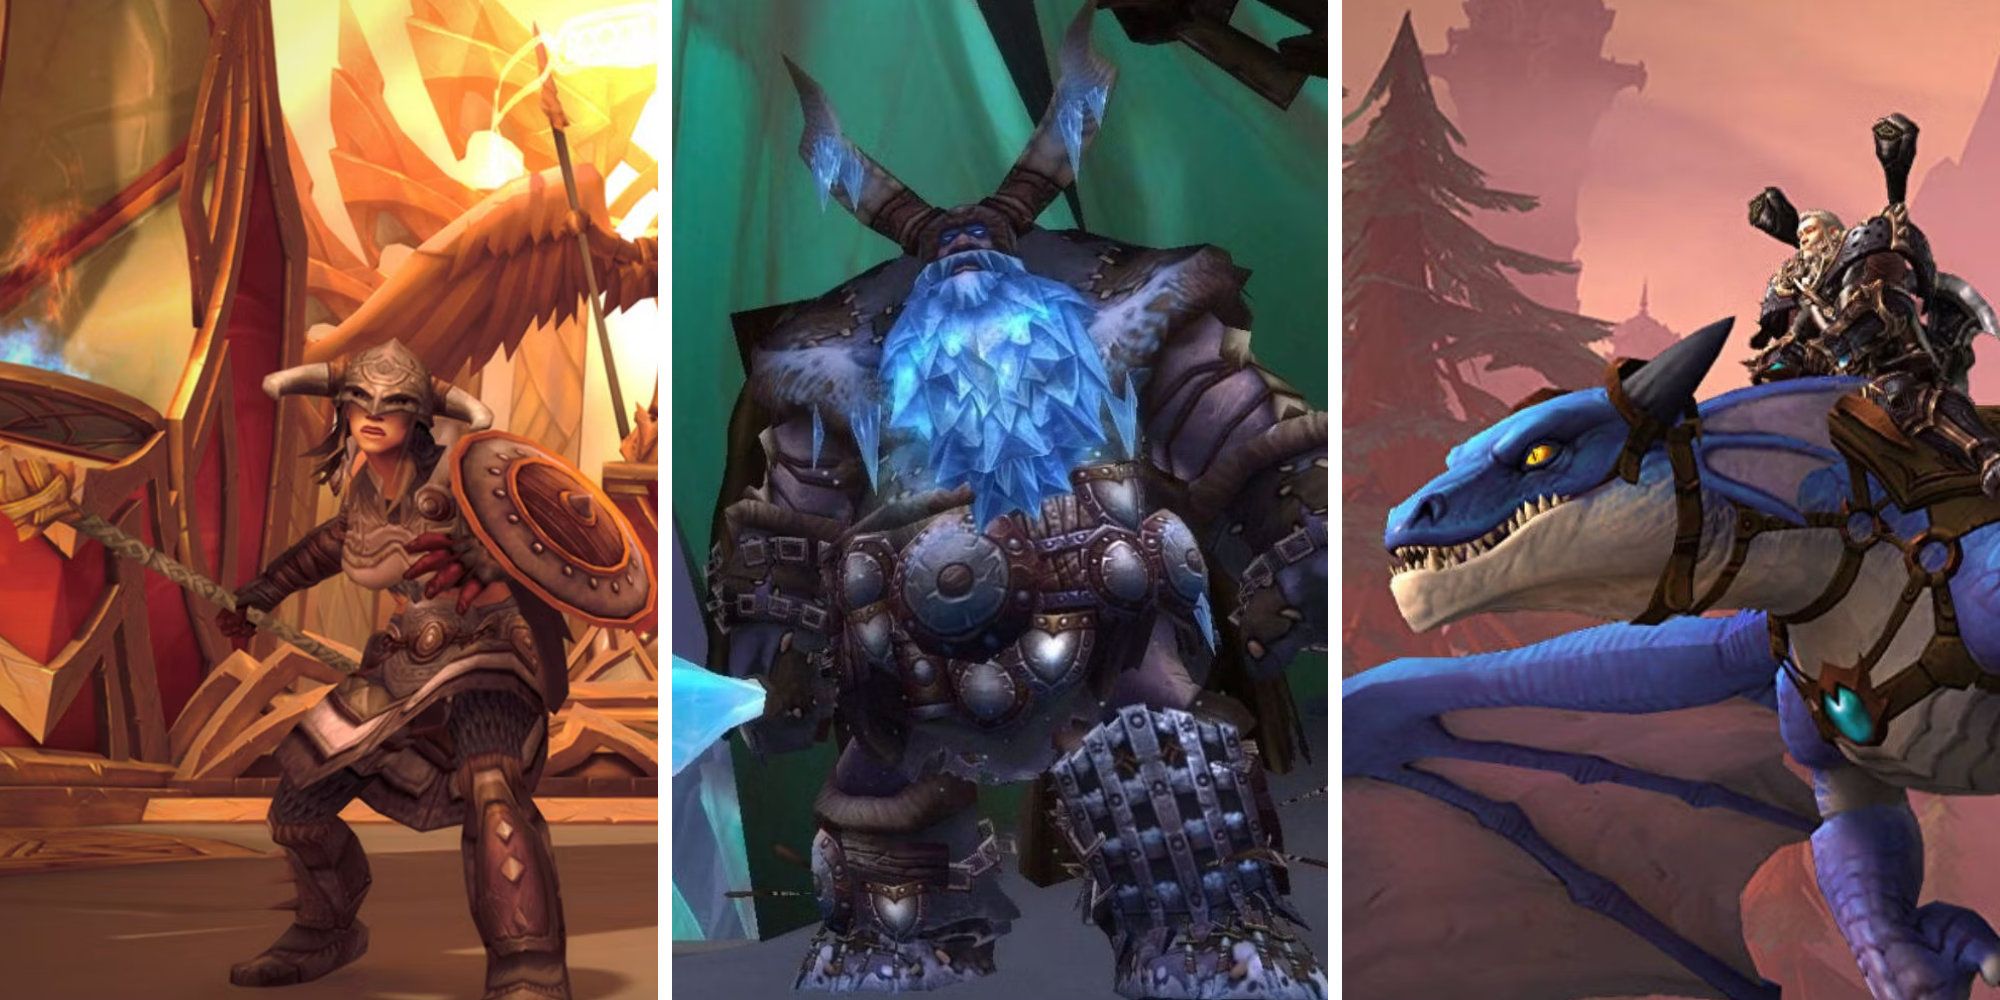 Split image of a warrior, a frost guy, and a man riding a dragon